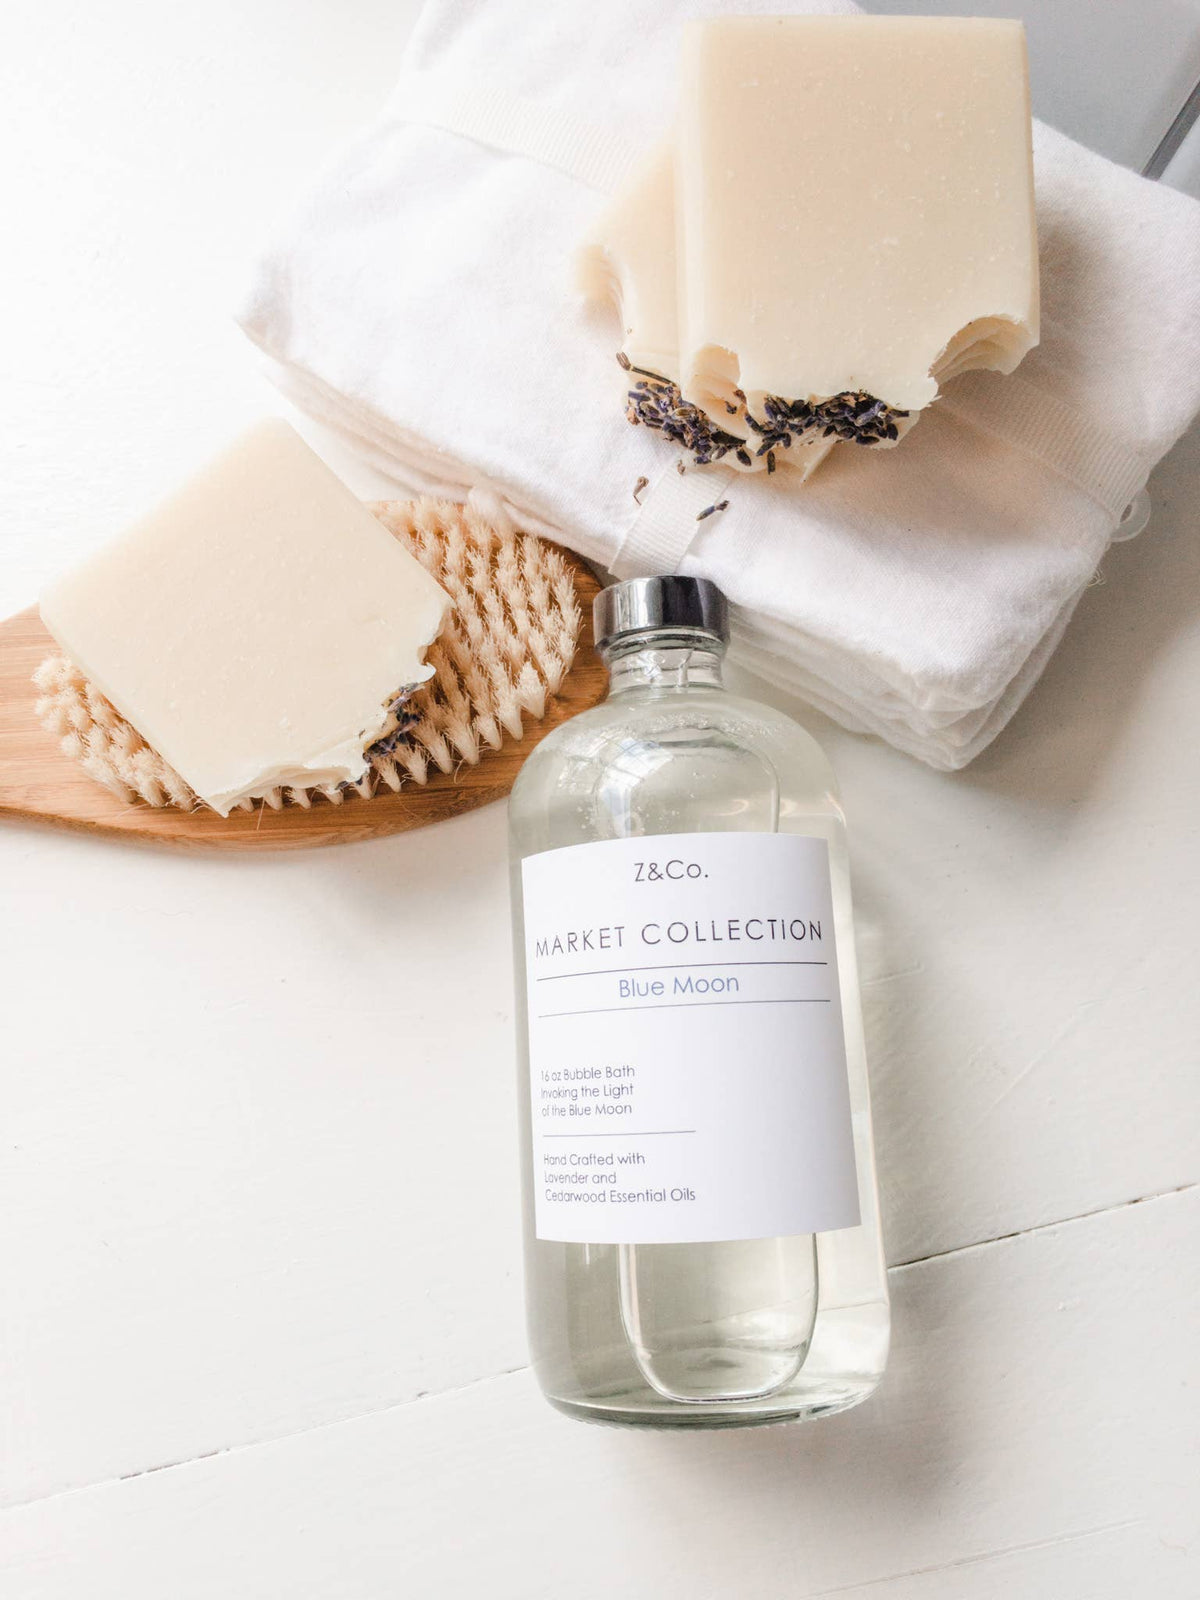 Two bars of soap with lavender essential oil on a wooden soap dish beside a white towel and a Z&Co. Market Collection Blue moon Bubble Bath in a clear bottle on a white surface.